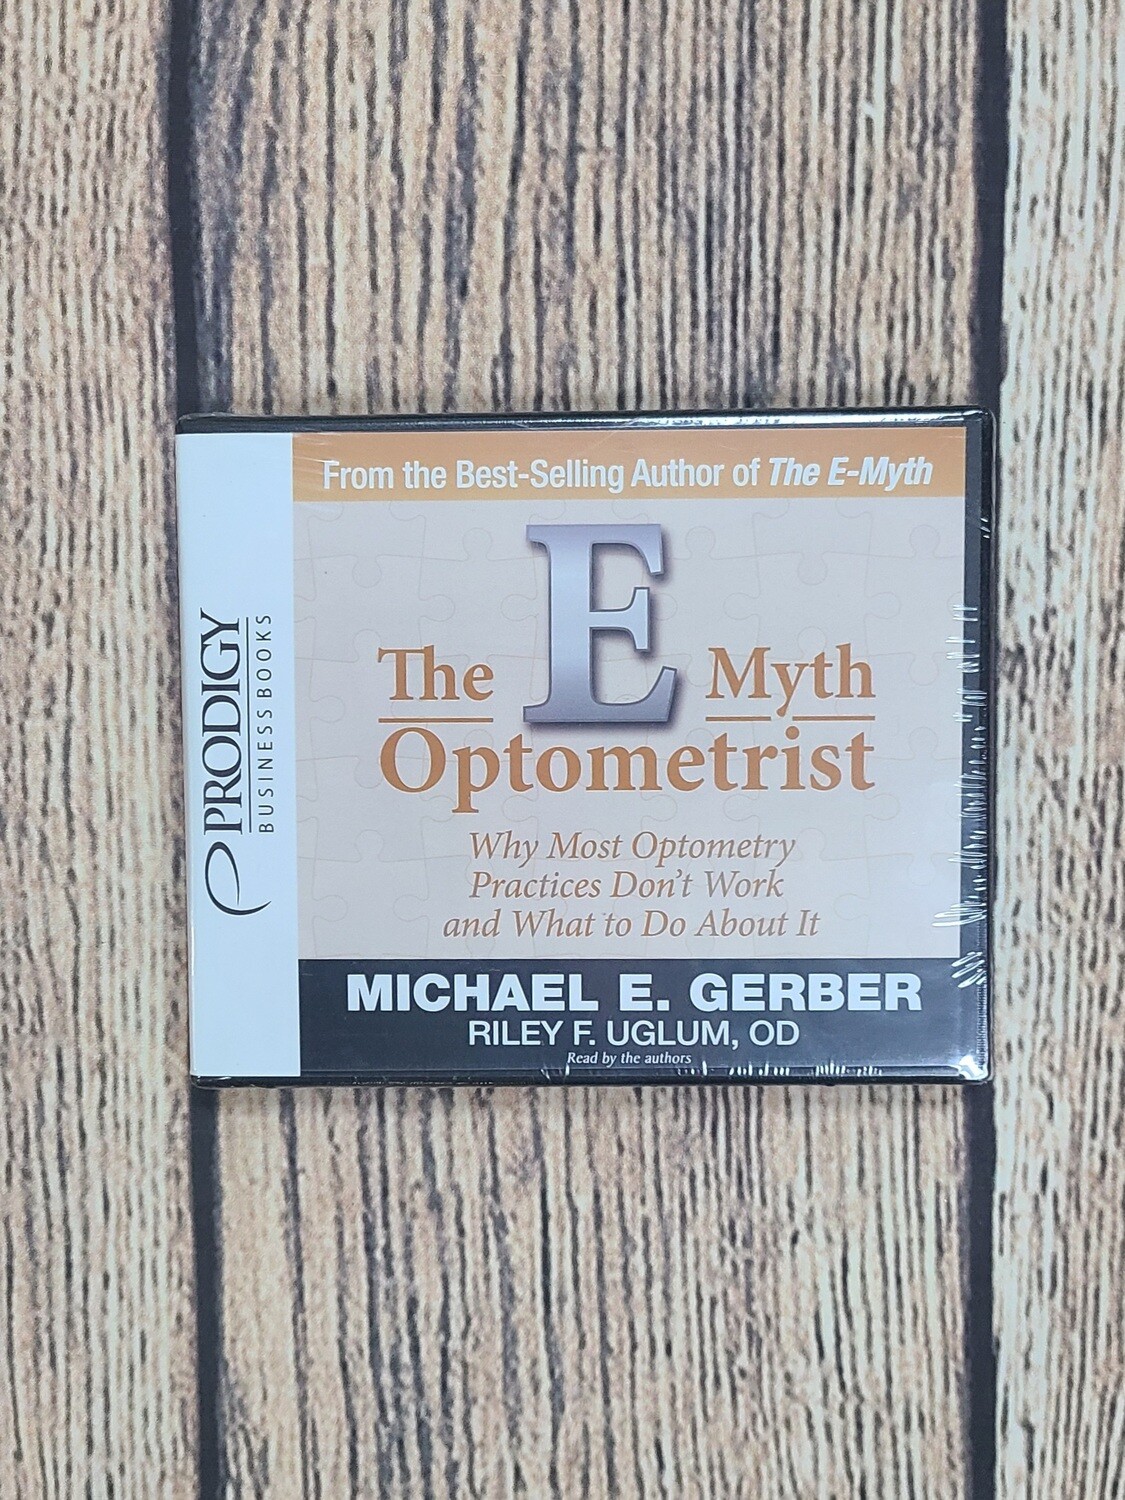 The E-Myth Optometrist: Why Most Optometry Practices Don't Work and What to Do About It by Michael E. Gerber and Riley F. Uglum